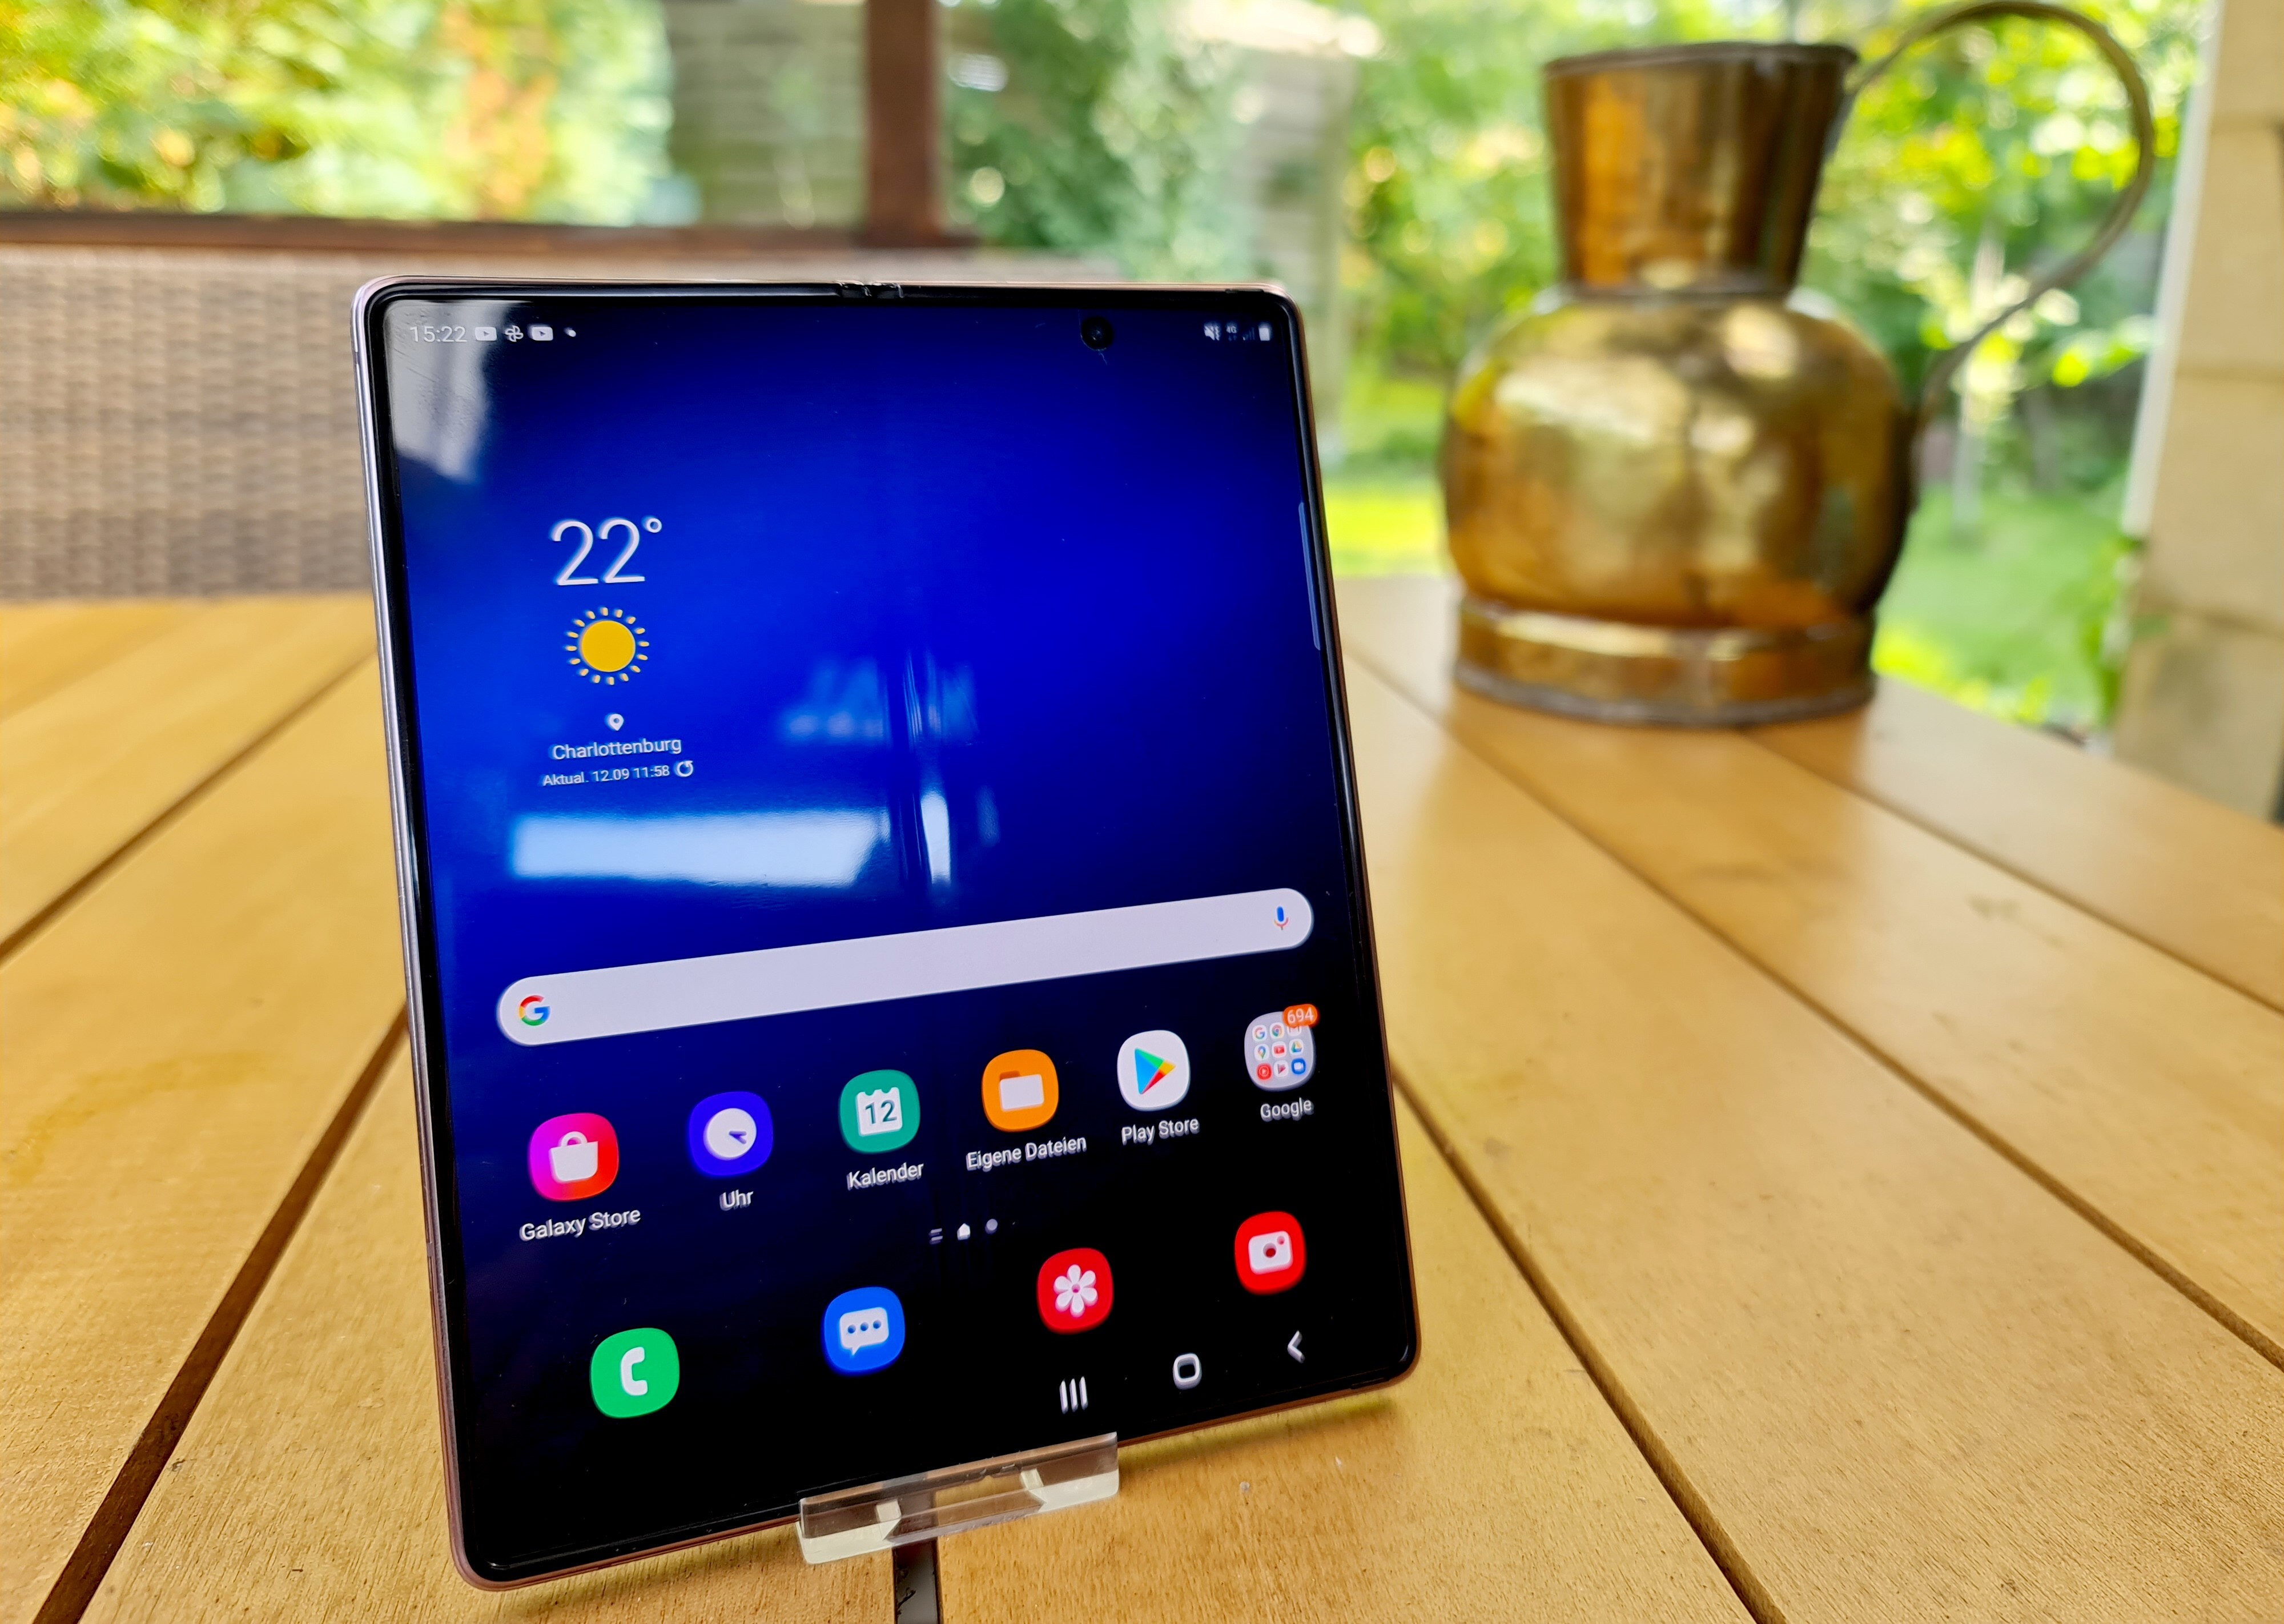 Samsung Galaxy Fold2 And Motorola Razr 5g Foldable Phones Improved For The Second Generation But Can They Stand Up To Everyday Use South China Morning Post